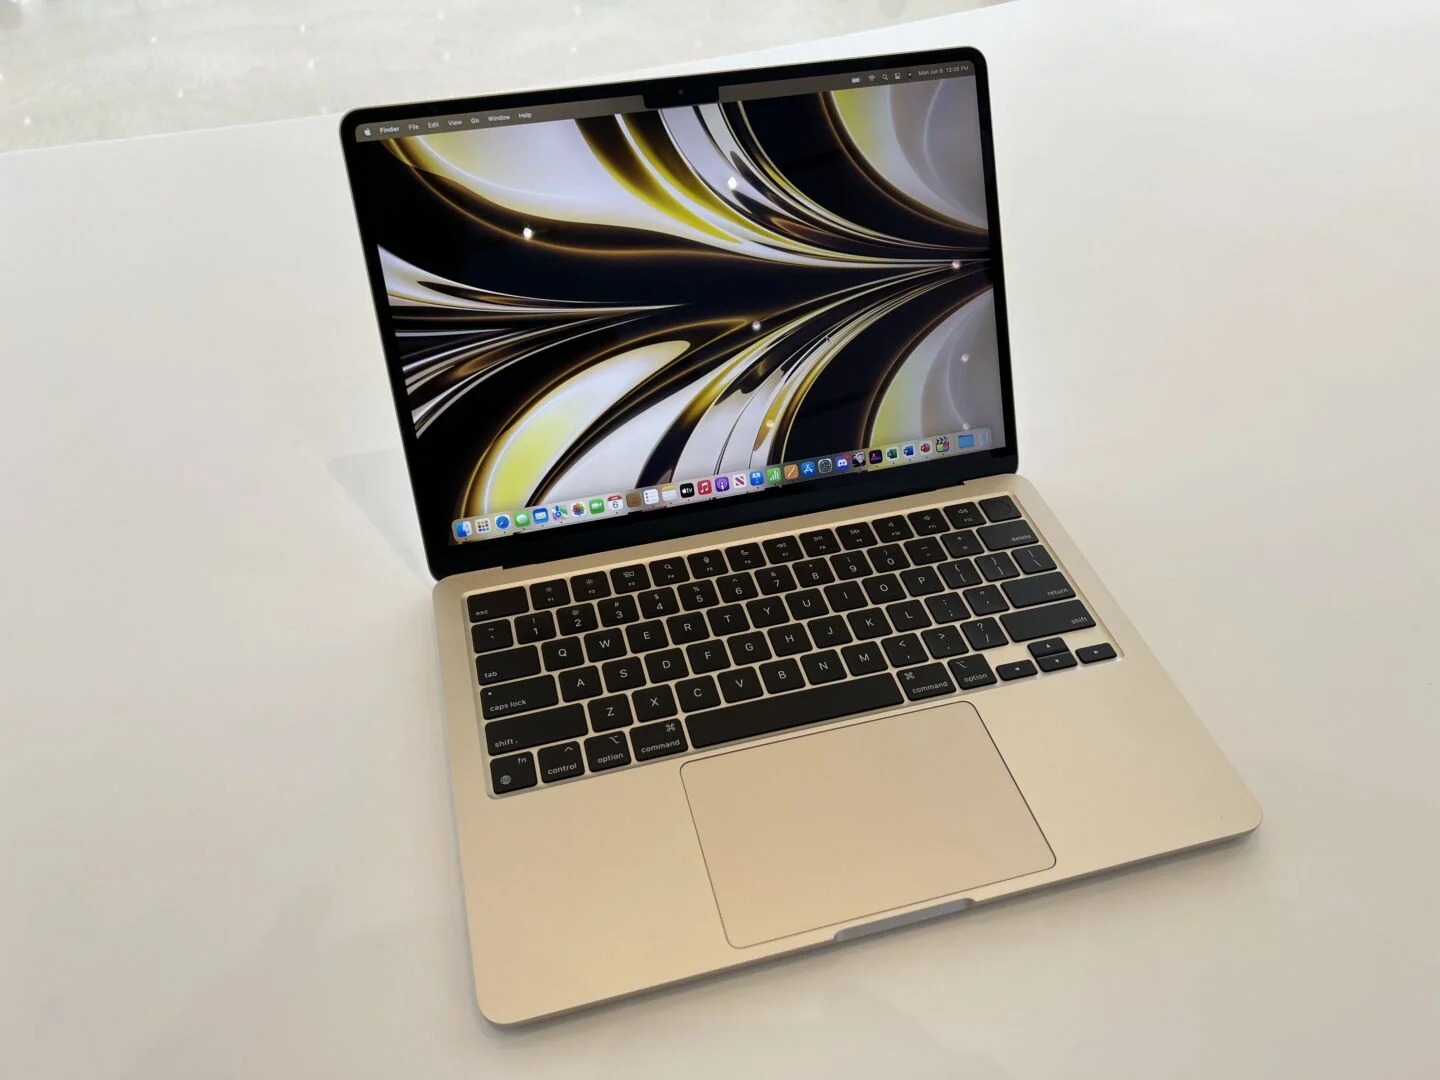 MacBook Air M2 is as powerful as the Pro model